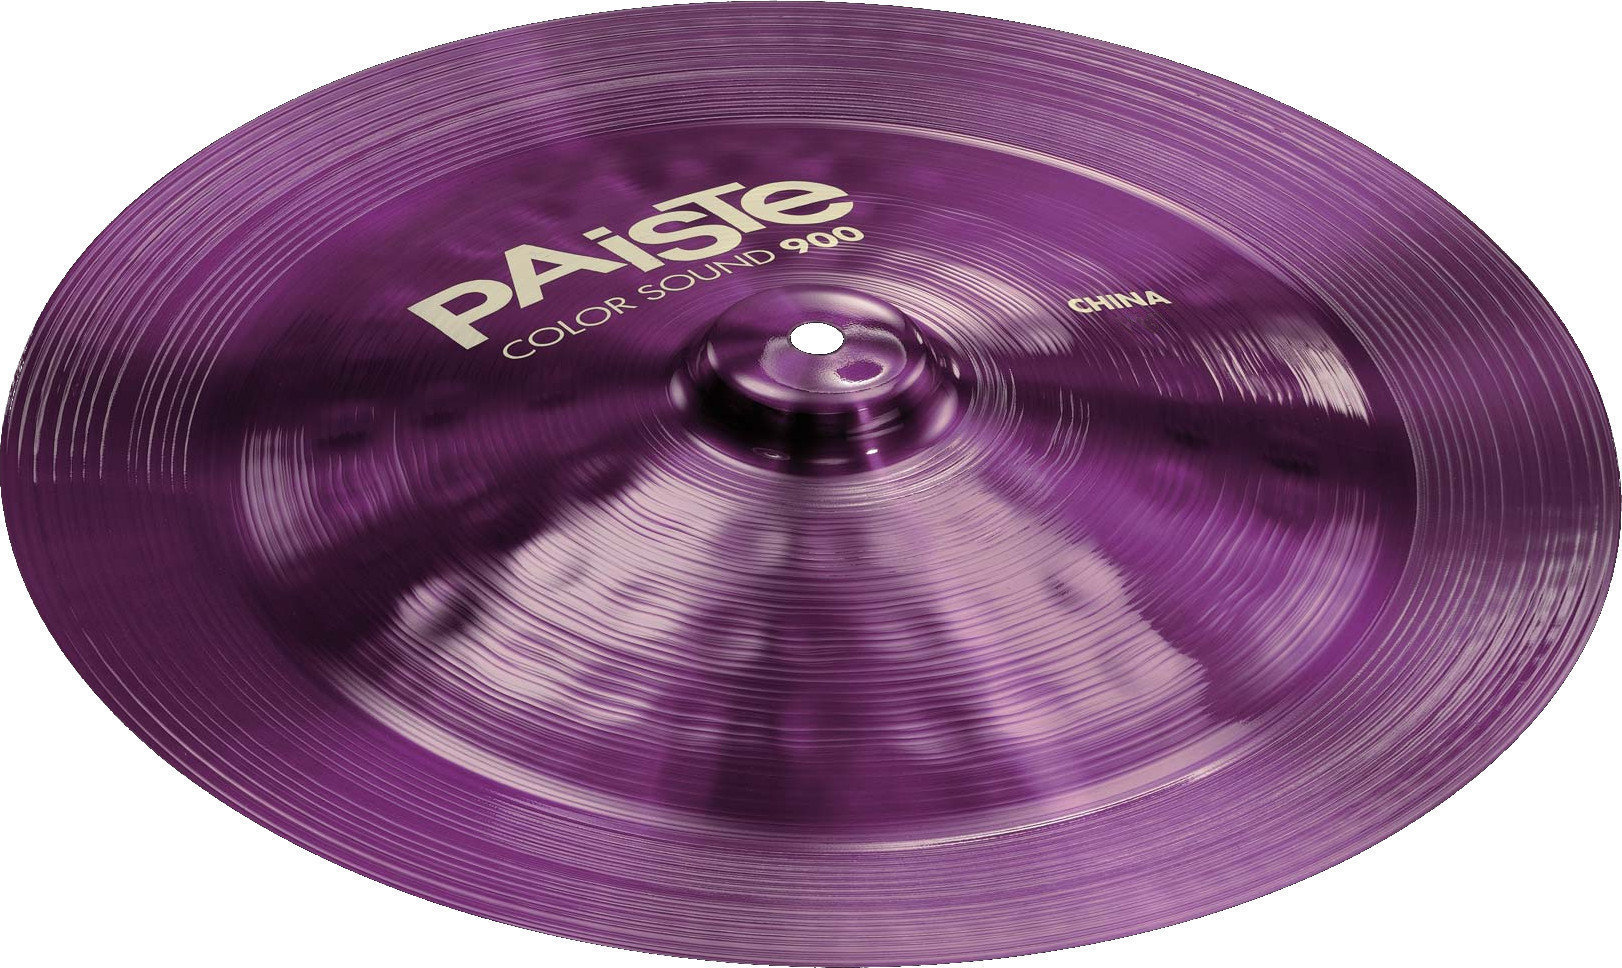 China Cymbal Paiste Color Sound 900 China Cymbal 14" Violet